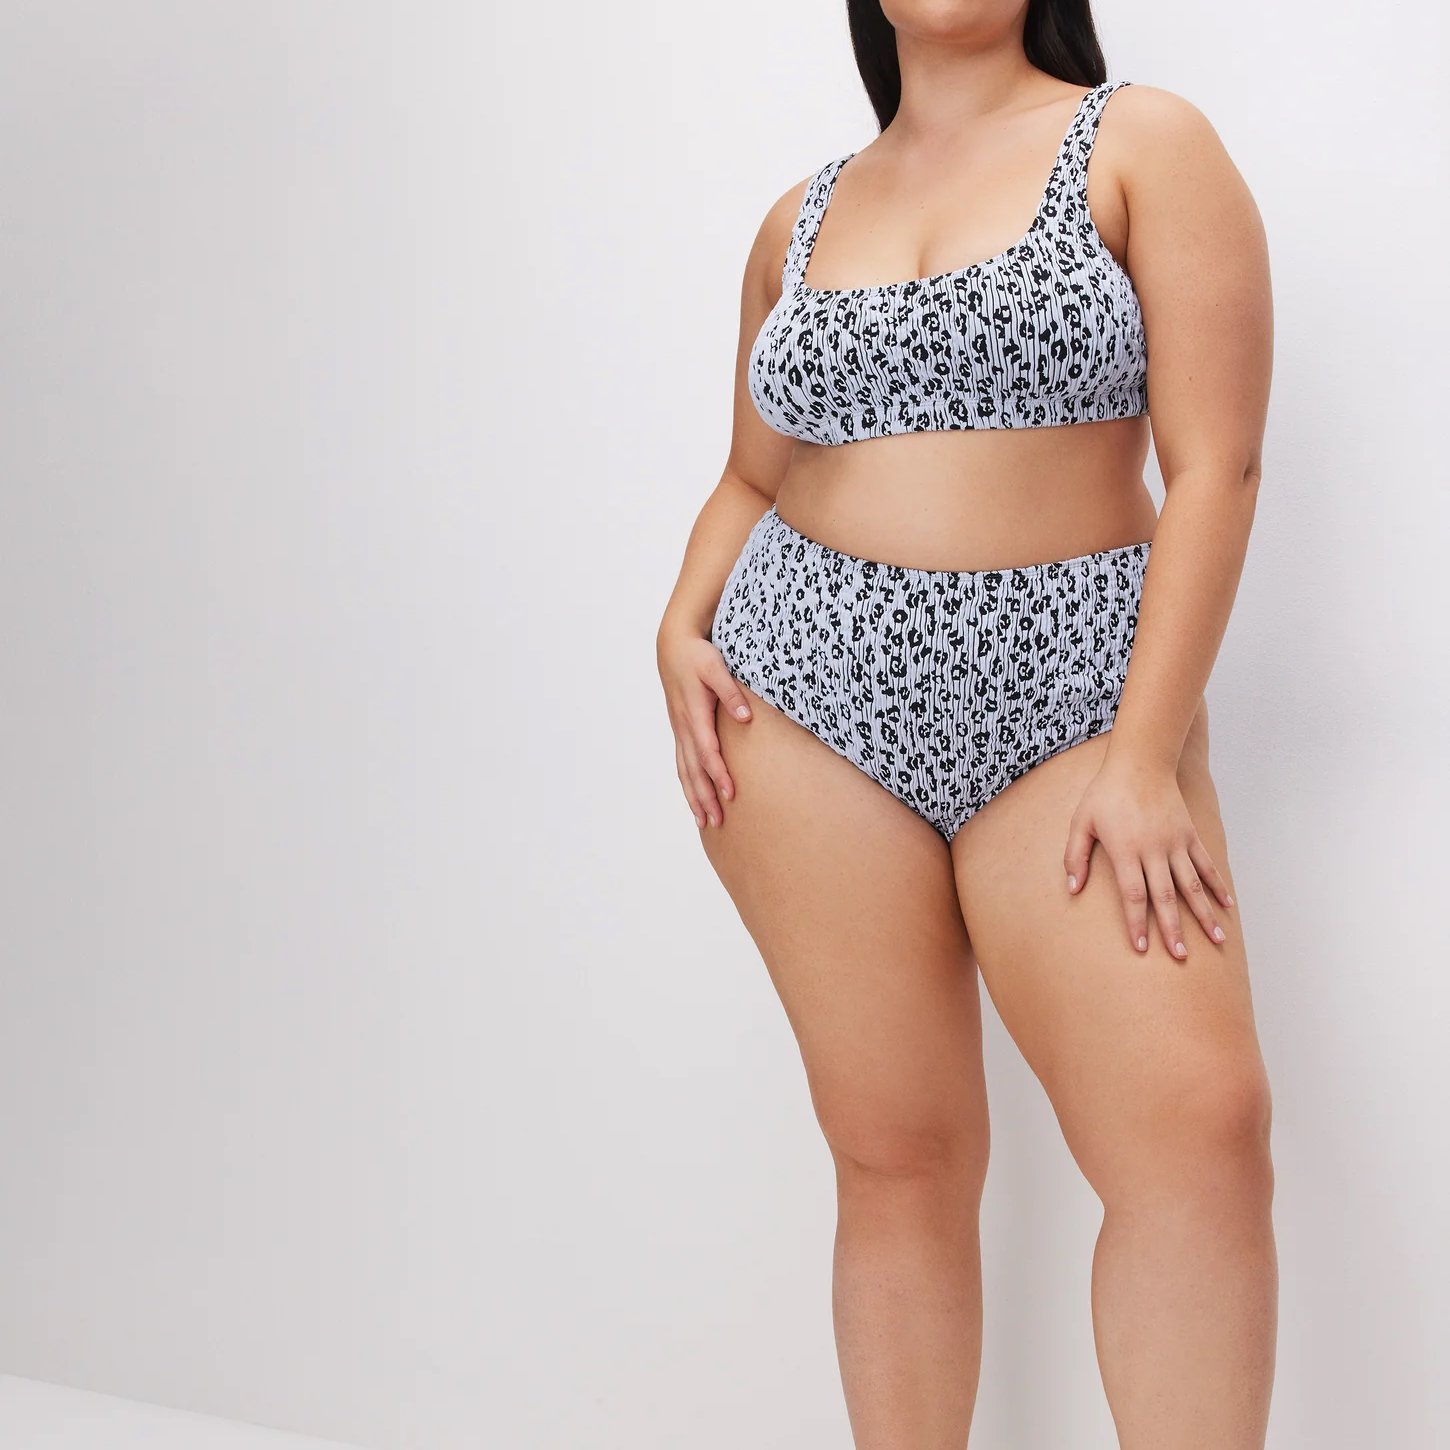 The 18 Best Swimsuits For Curvy Women With Gorgeous Taste — The Candidly